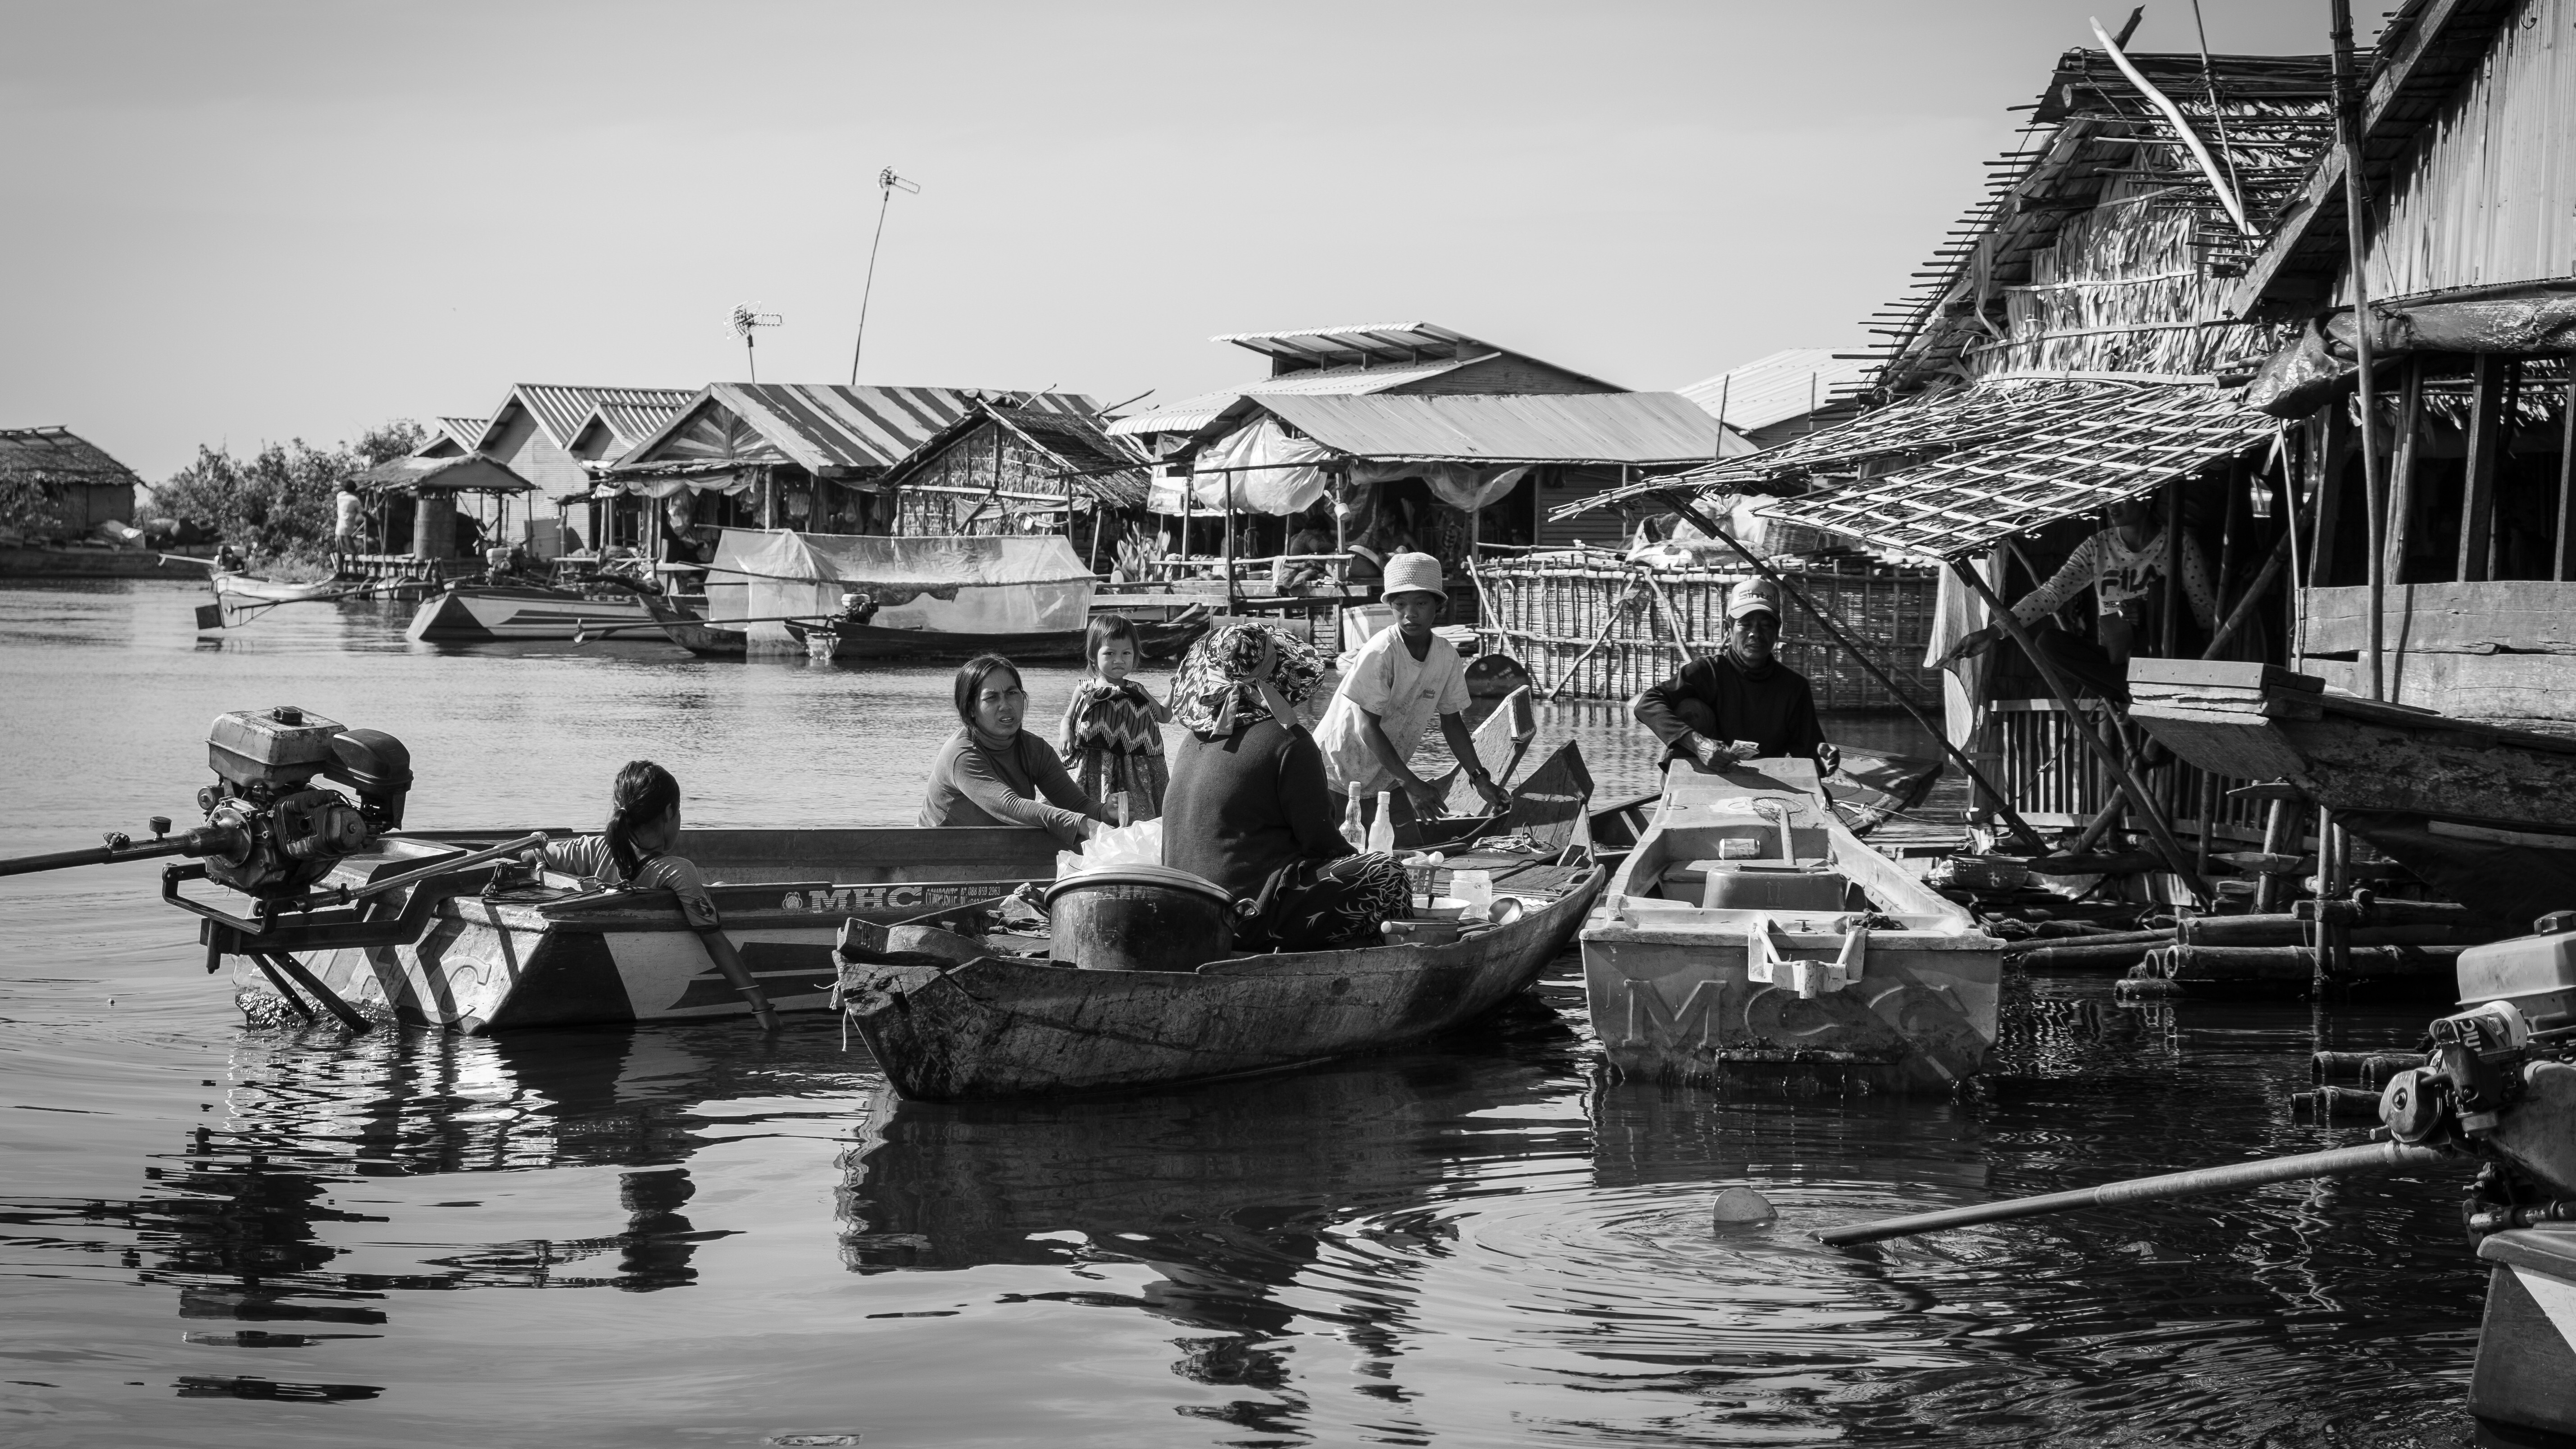 About 100,000 people live on or around Tonlé Sap, the poorest in floating communities. The Lake Clinic – Cambodia’s founder, Jon Morgan, says there are at least 50 such communities on the lake. Most eke out a subsistence living through fishing. The average income for a family is about 10,000 riel (US$2) a day. Photo: Gary Jones